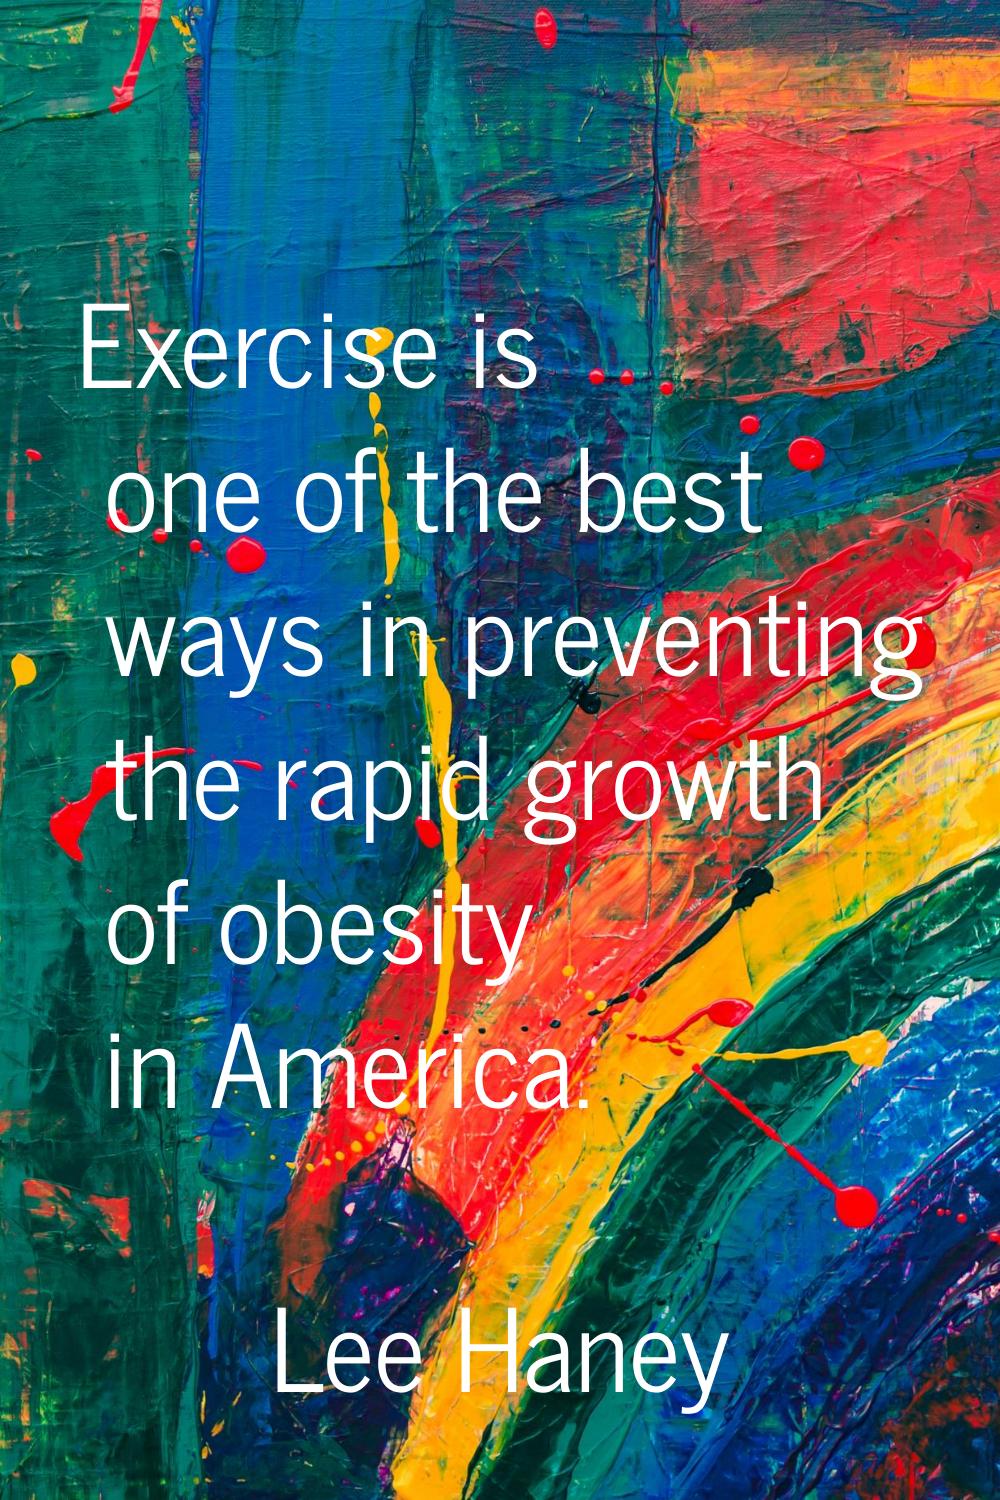 Exercise is one of the best ways in preventing the rapid growth of obesity in America.